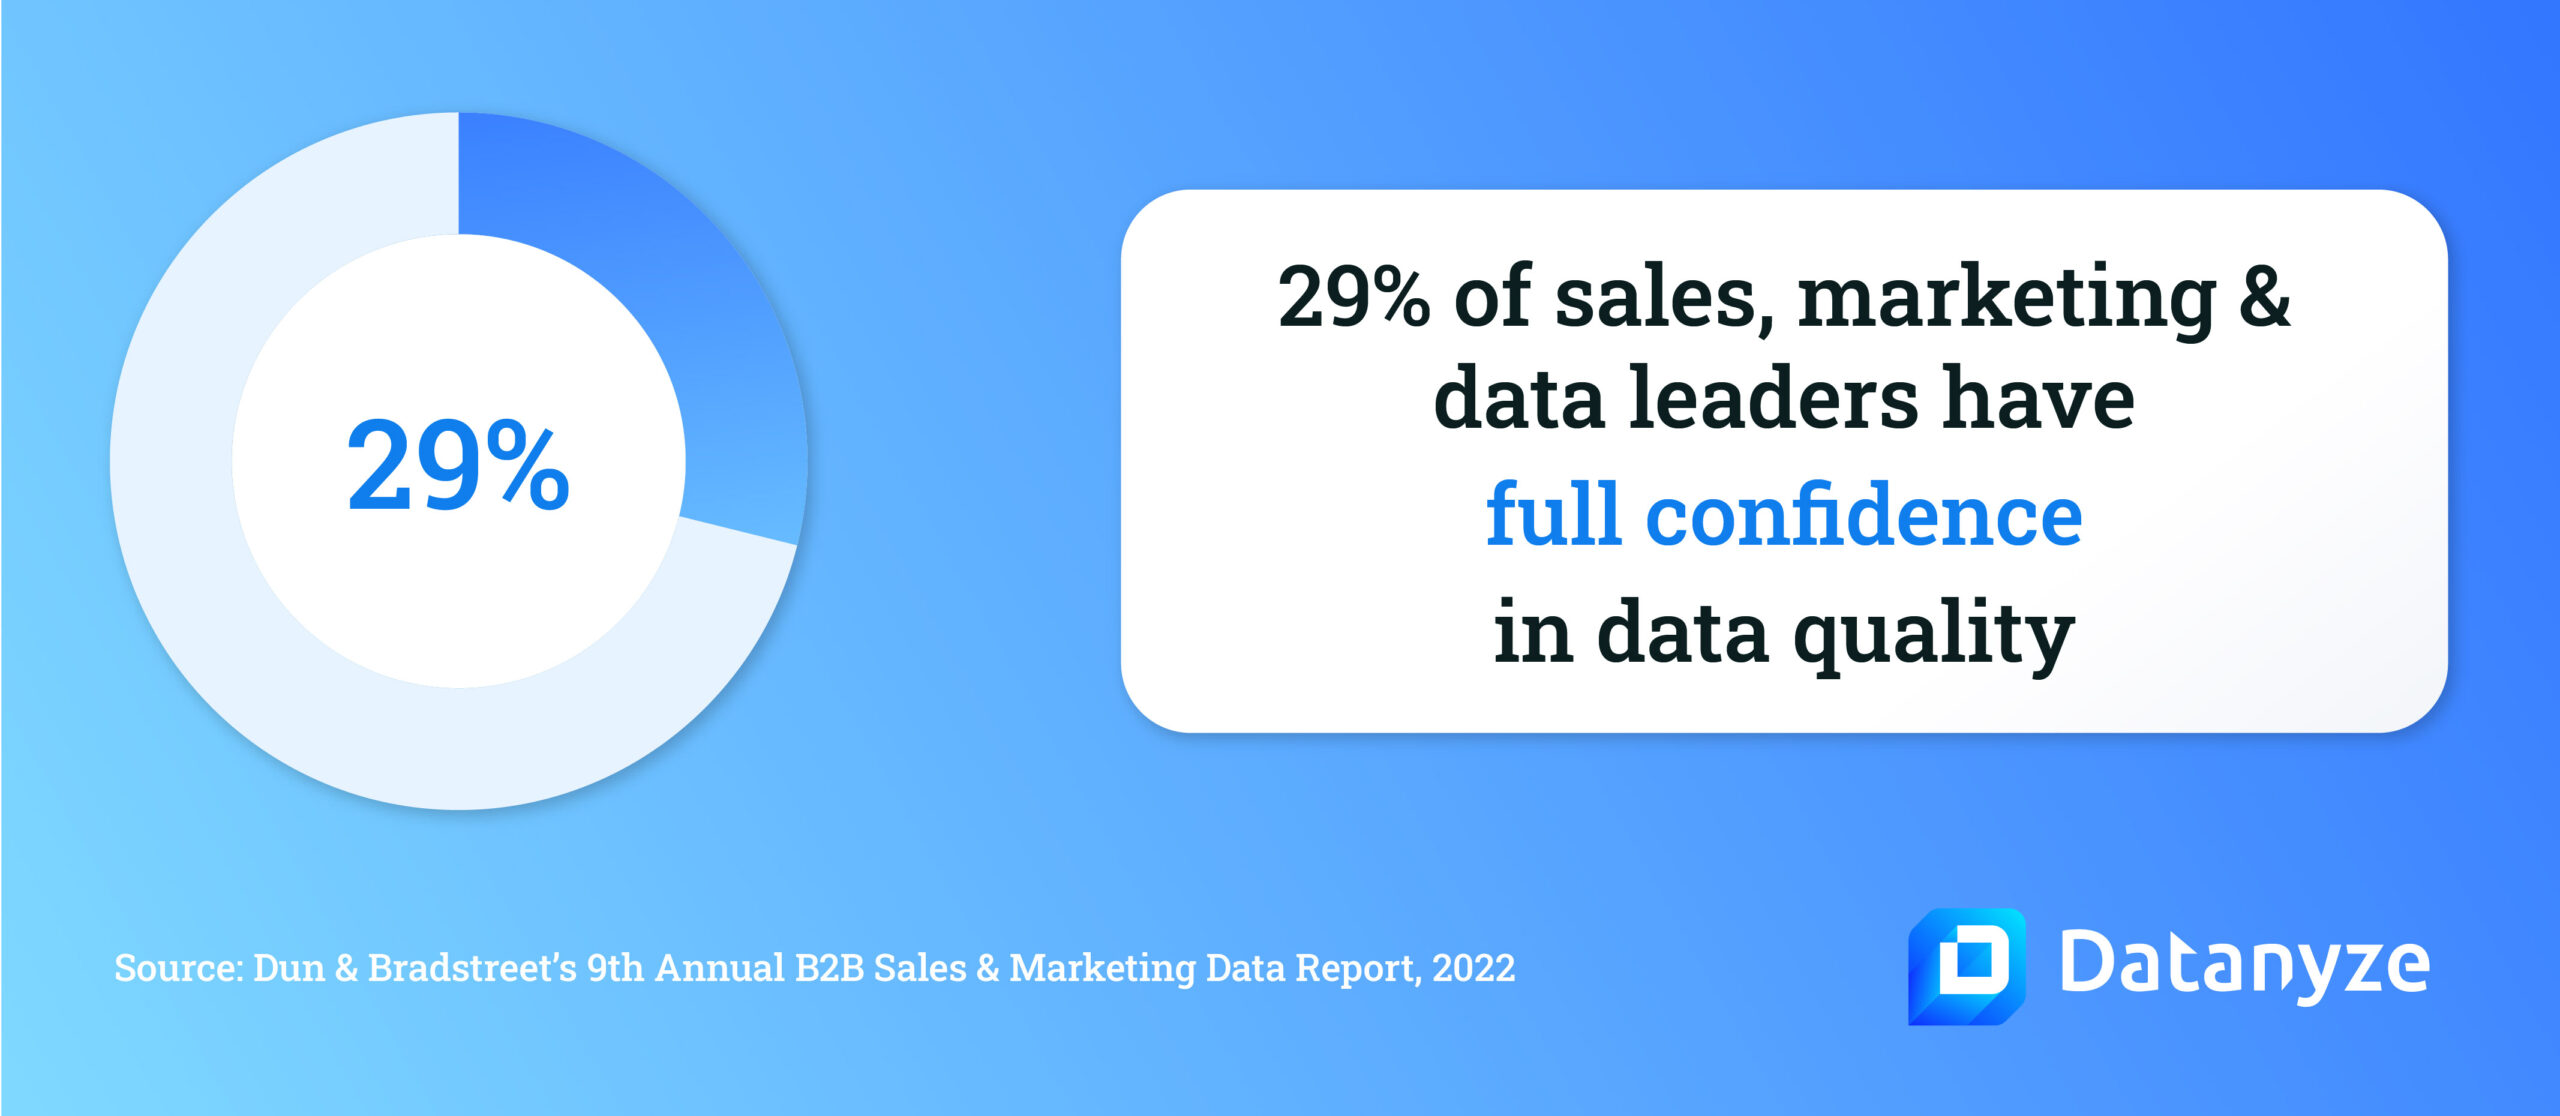 According to Dun & Bradstreet’s 9th Annual B2B Sales & Marketing Data Report. 29% of sales, marketing & data leaders have full confidence in data quality